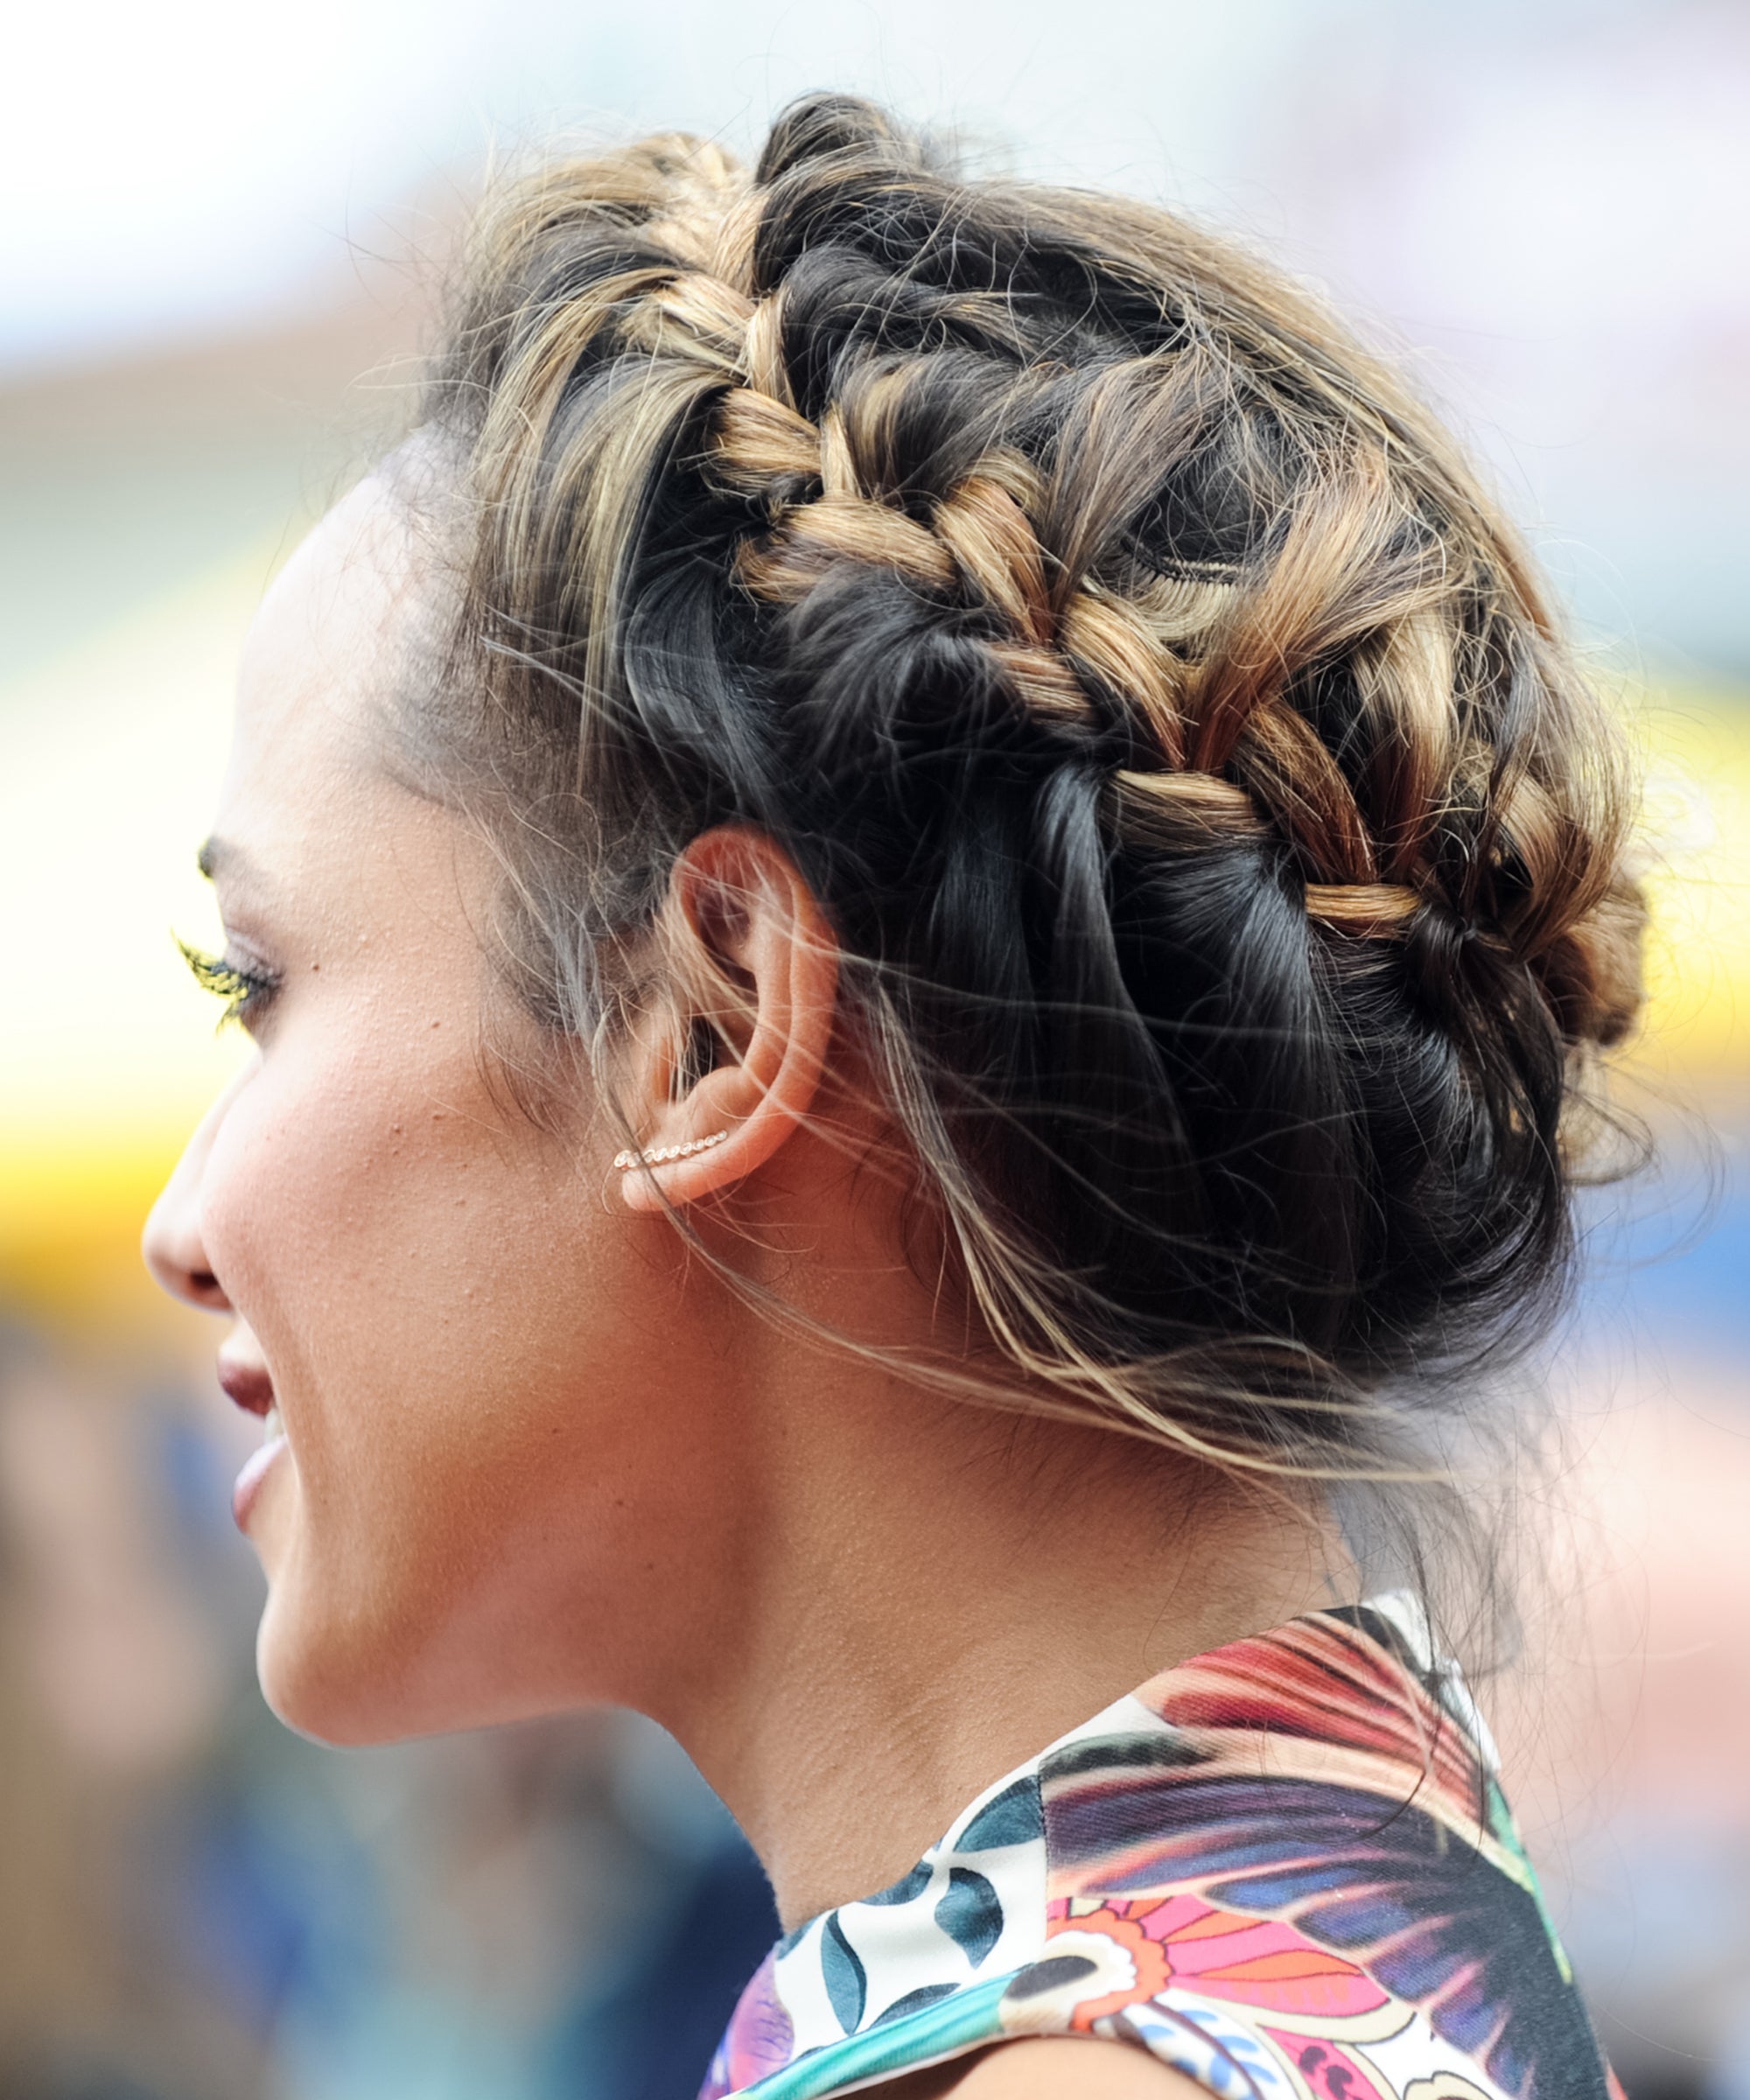 A Mohawk Hair Style with a French Braid and Cornrows